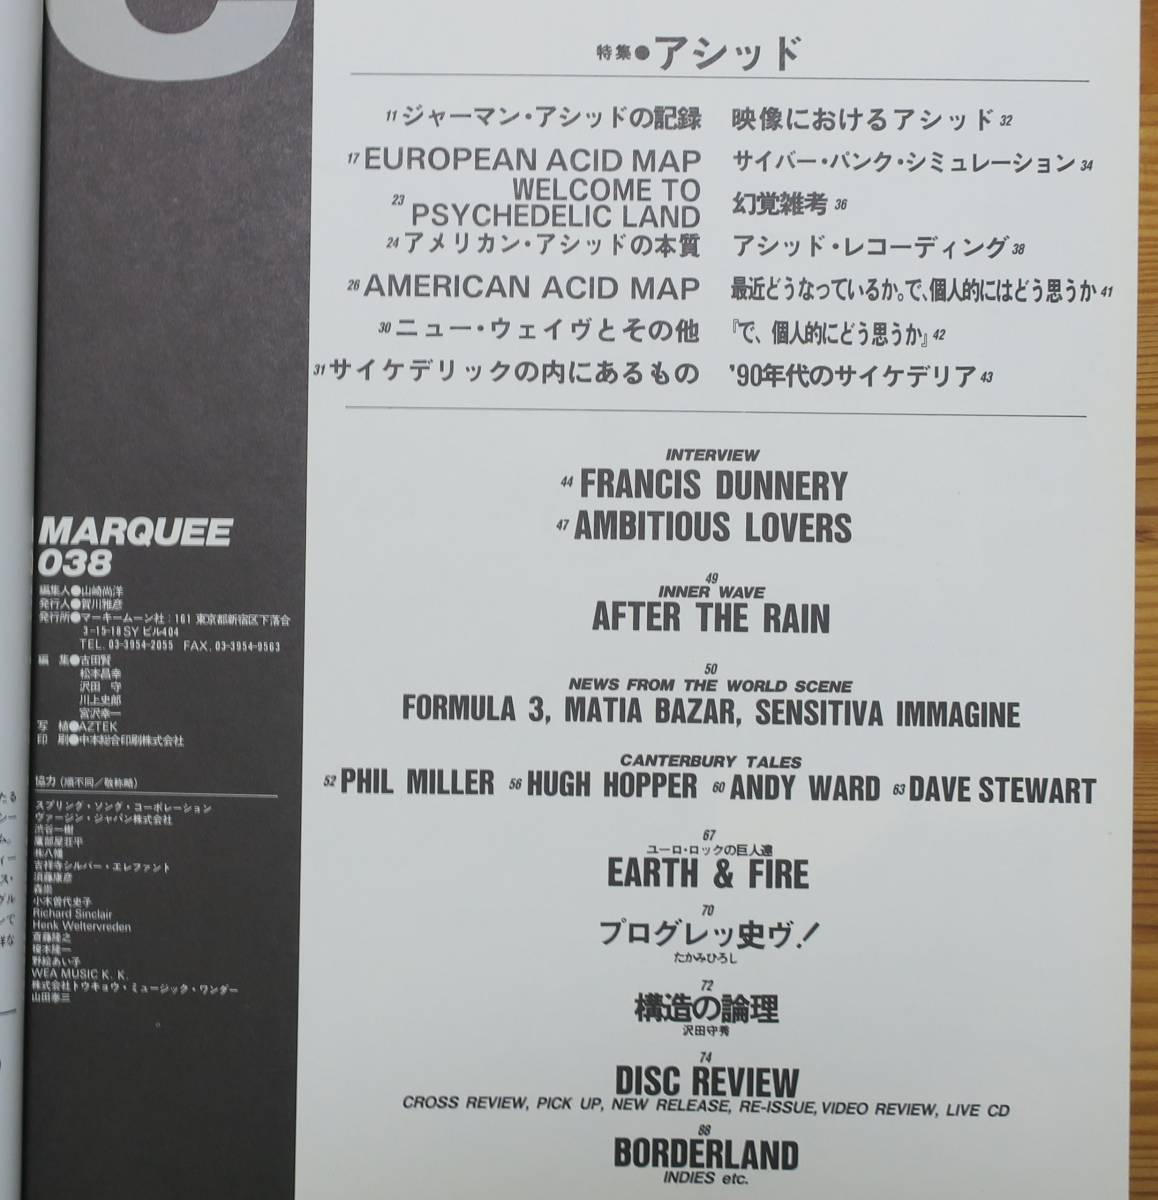 MARQUEE38FRANCIS DUNNERY1991AMBITIOUS LOVERS広池敦AFTER THE RAIN荒牧隆Phil Miller太田雅彦Hugh Hppper9ANDY WARD/camel/DAVE STEWART_画像2